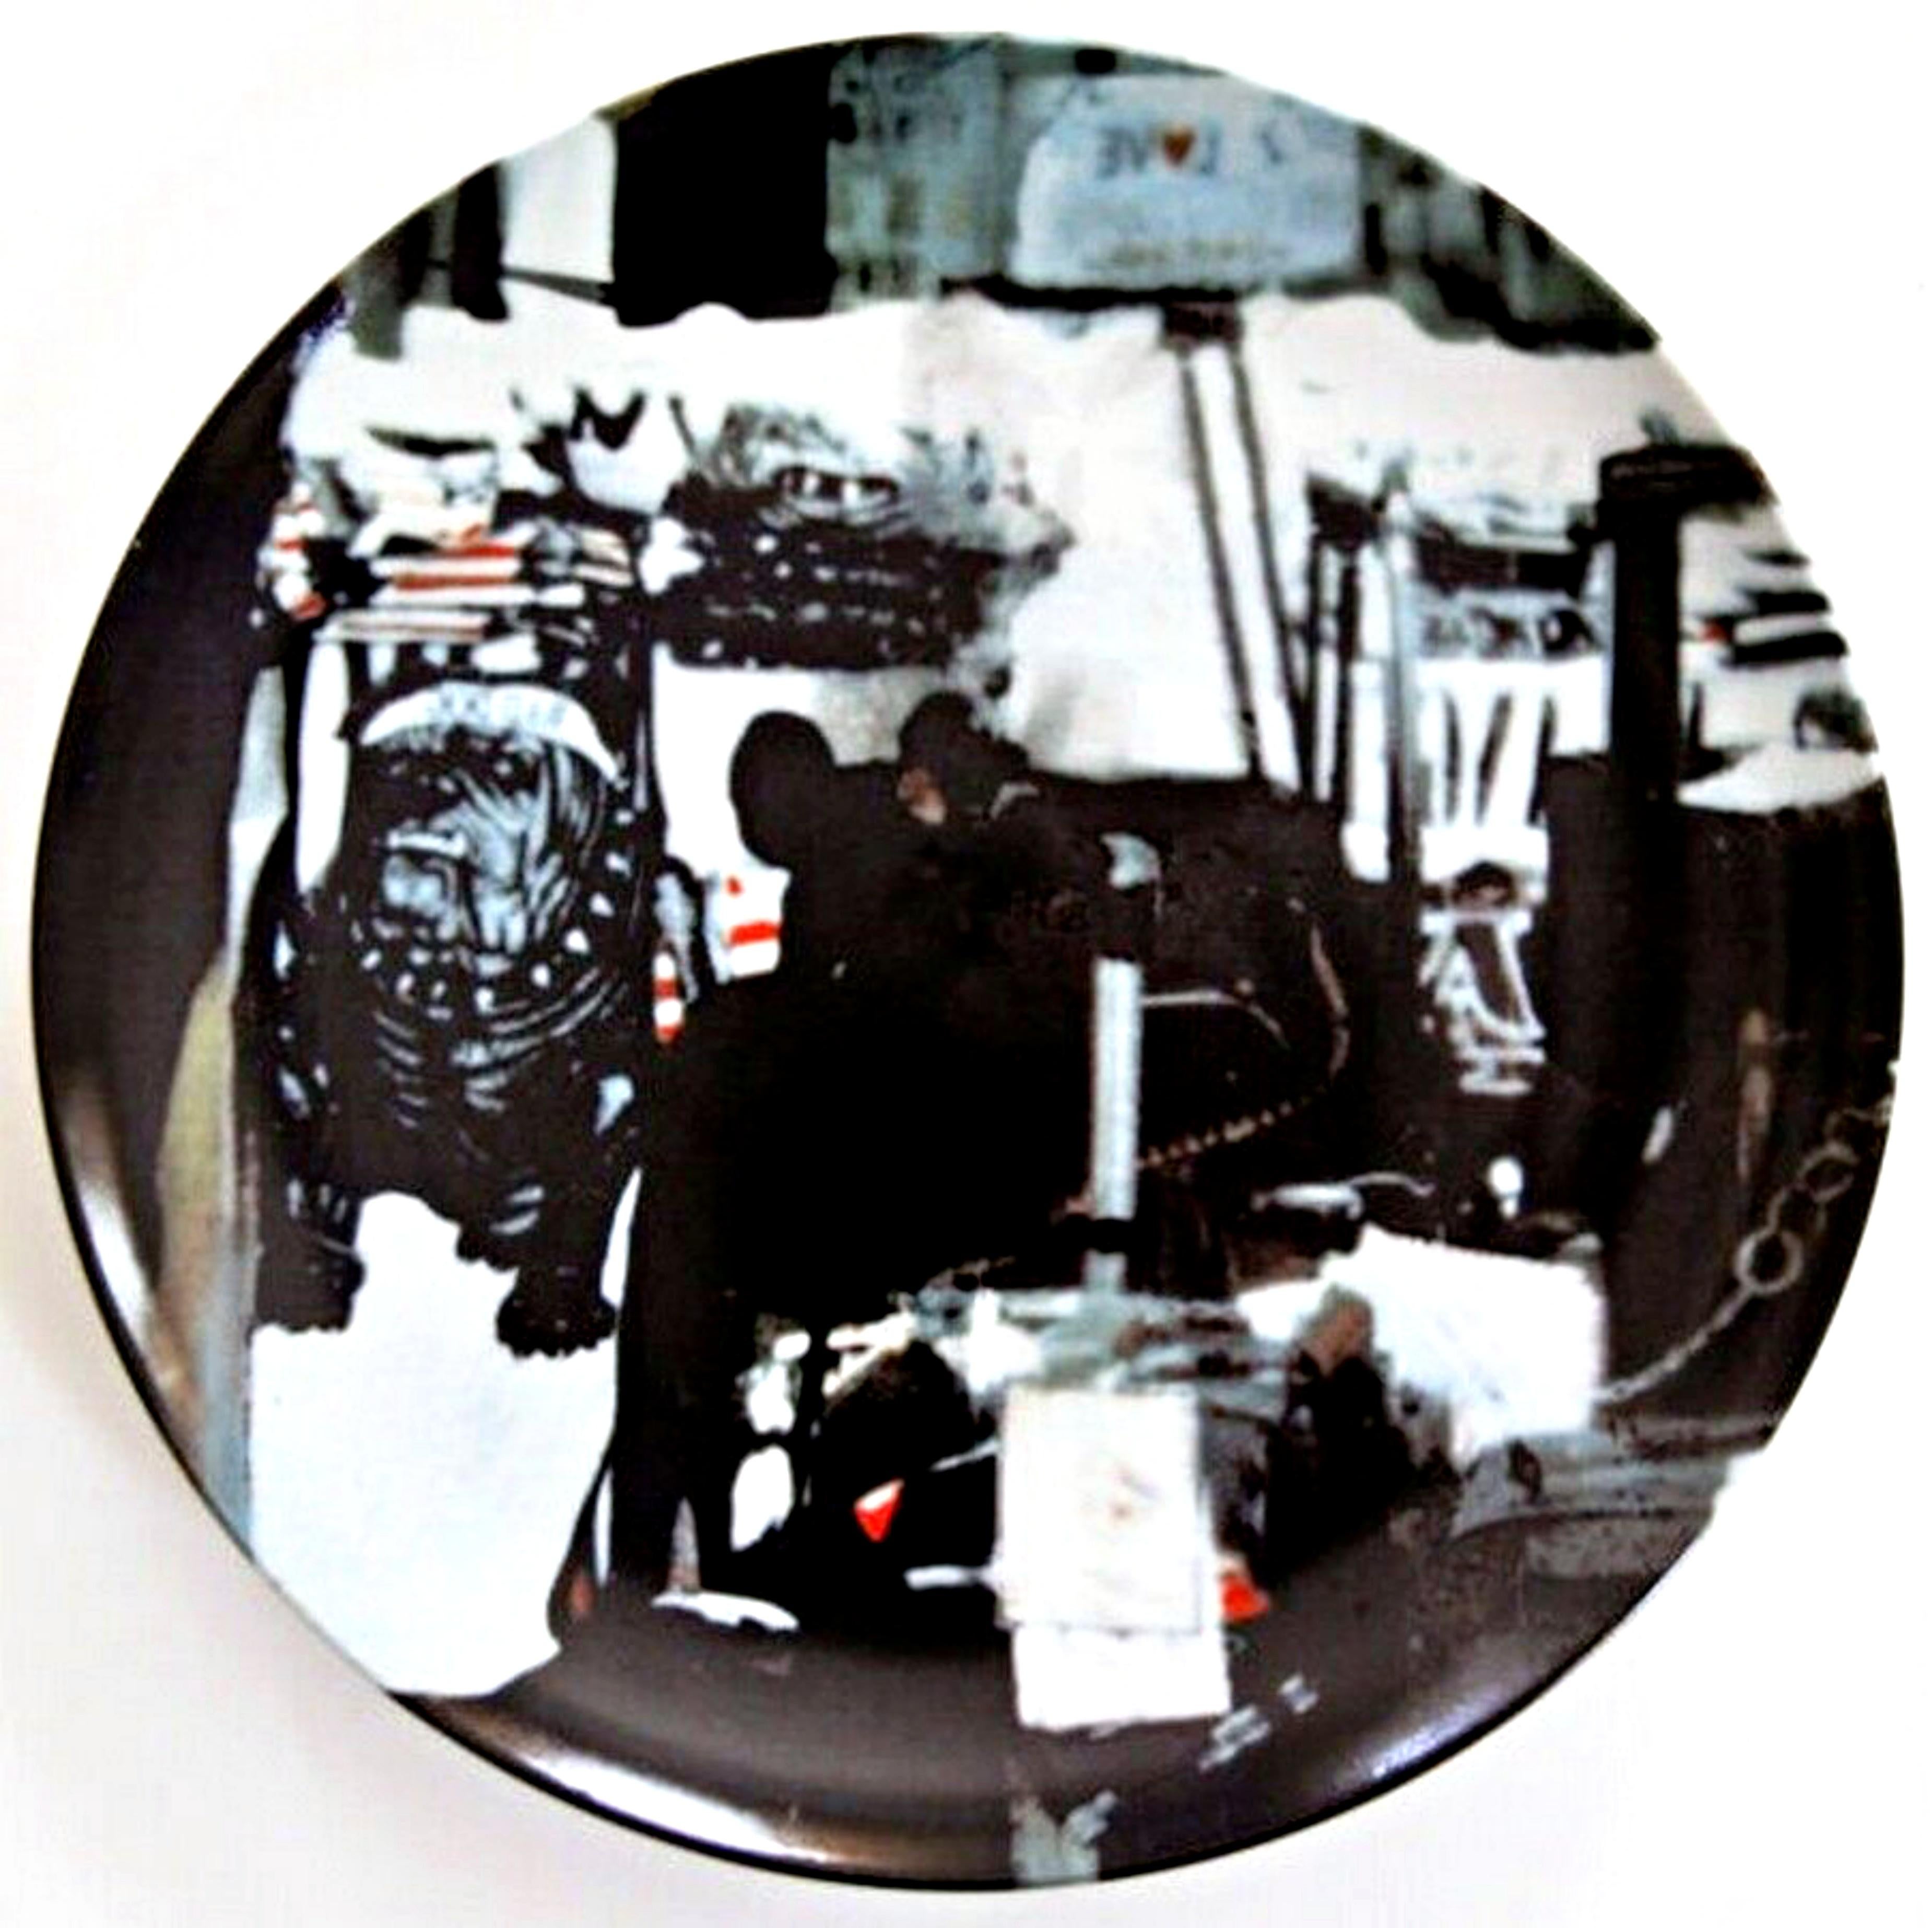 Untitled Limited Edition Porcelain Plate (Guggenheim Museum)